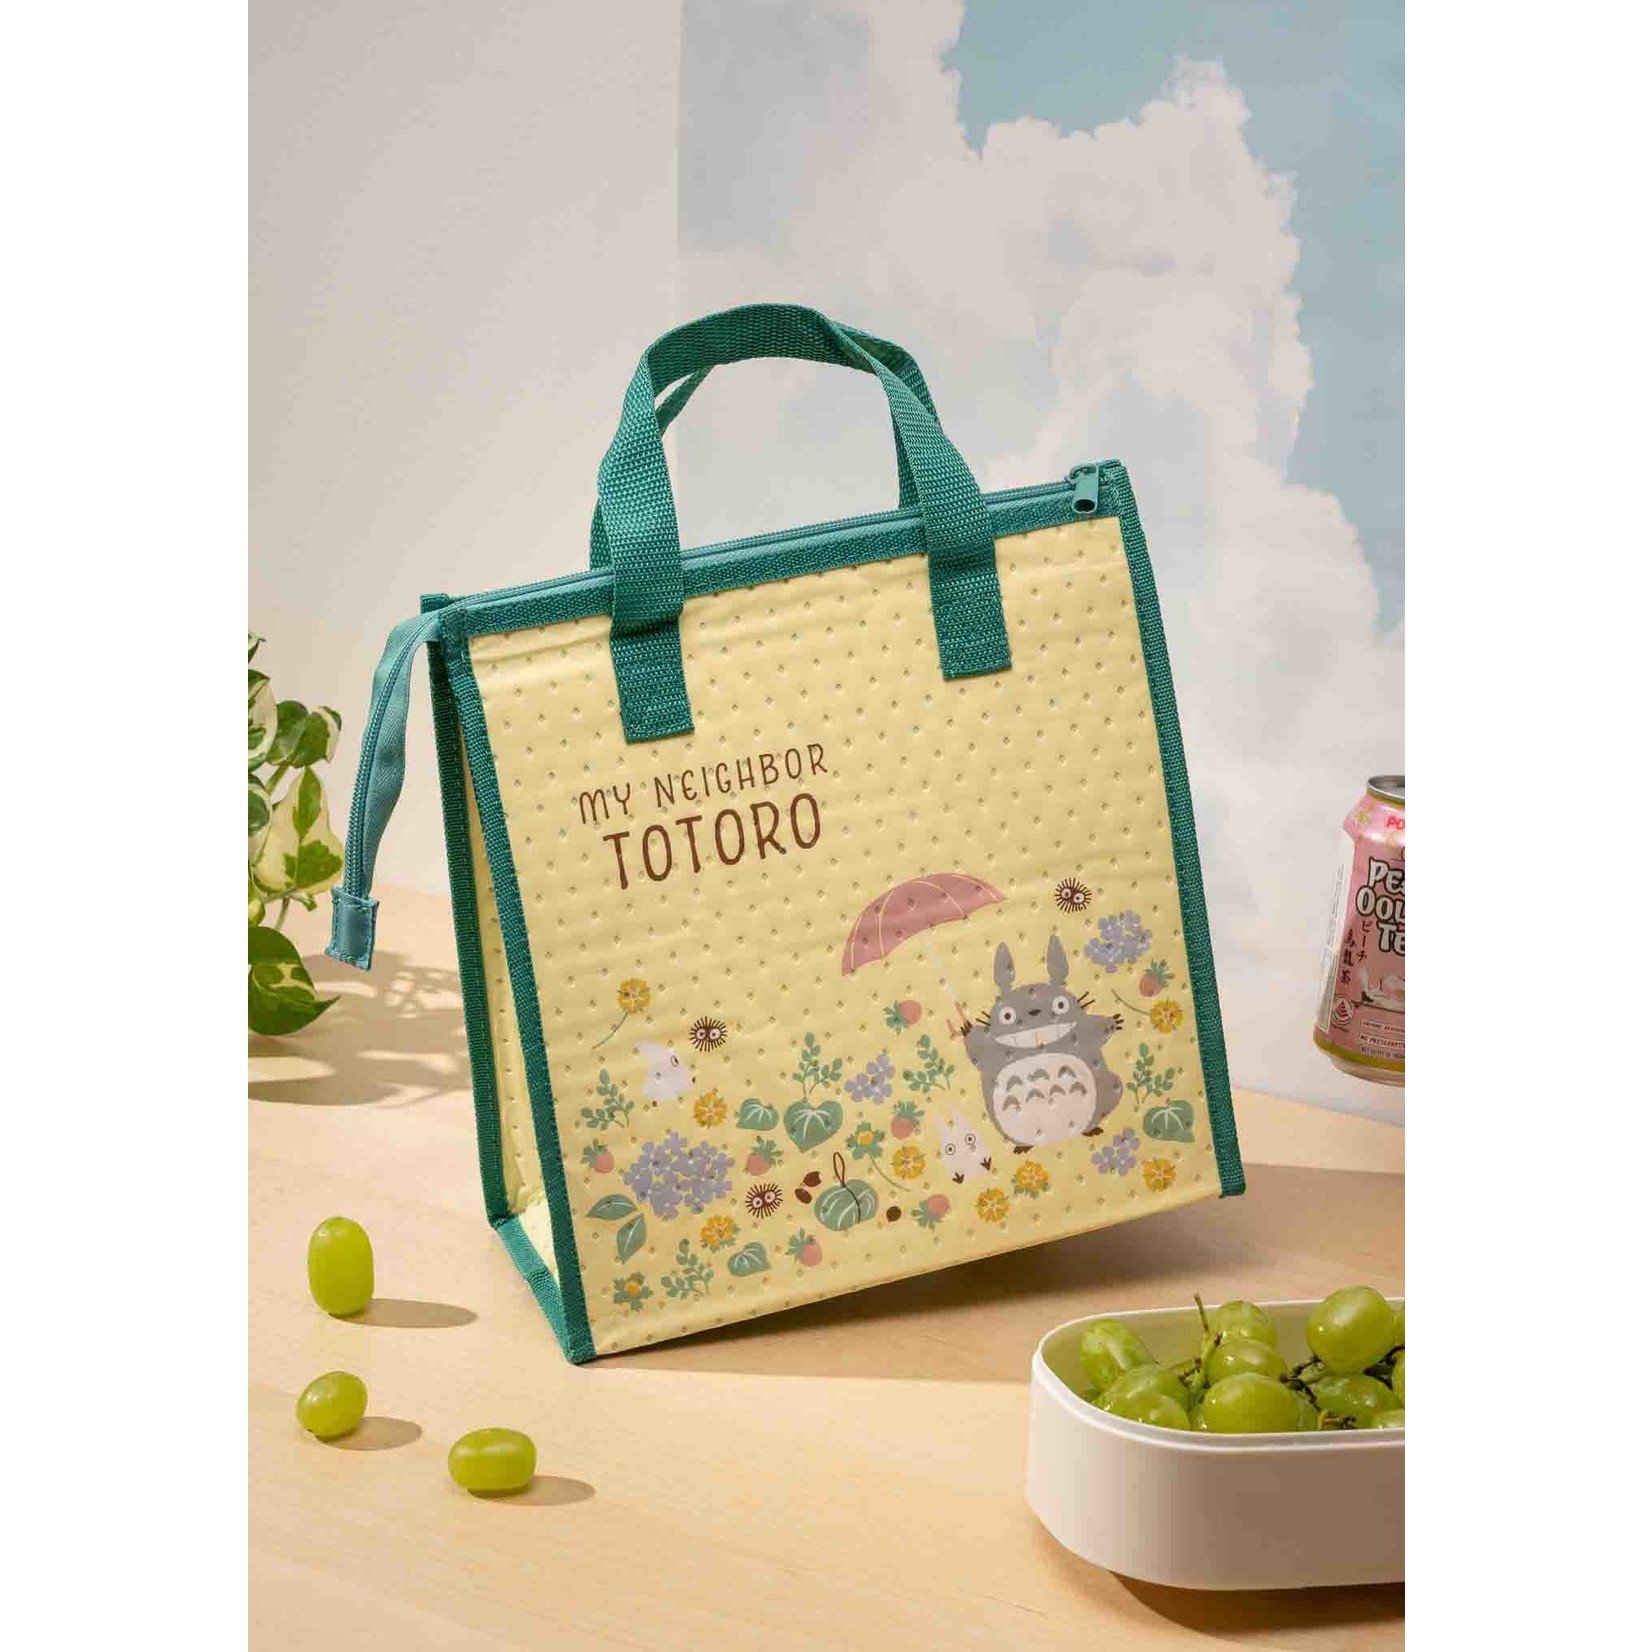 Skater Insulated Lunch Tote - My Neighbor Totoro (Flower Field) SK-GHB-3149